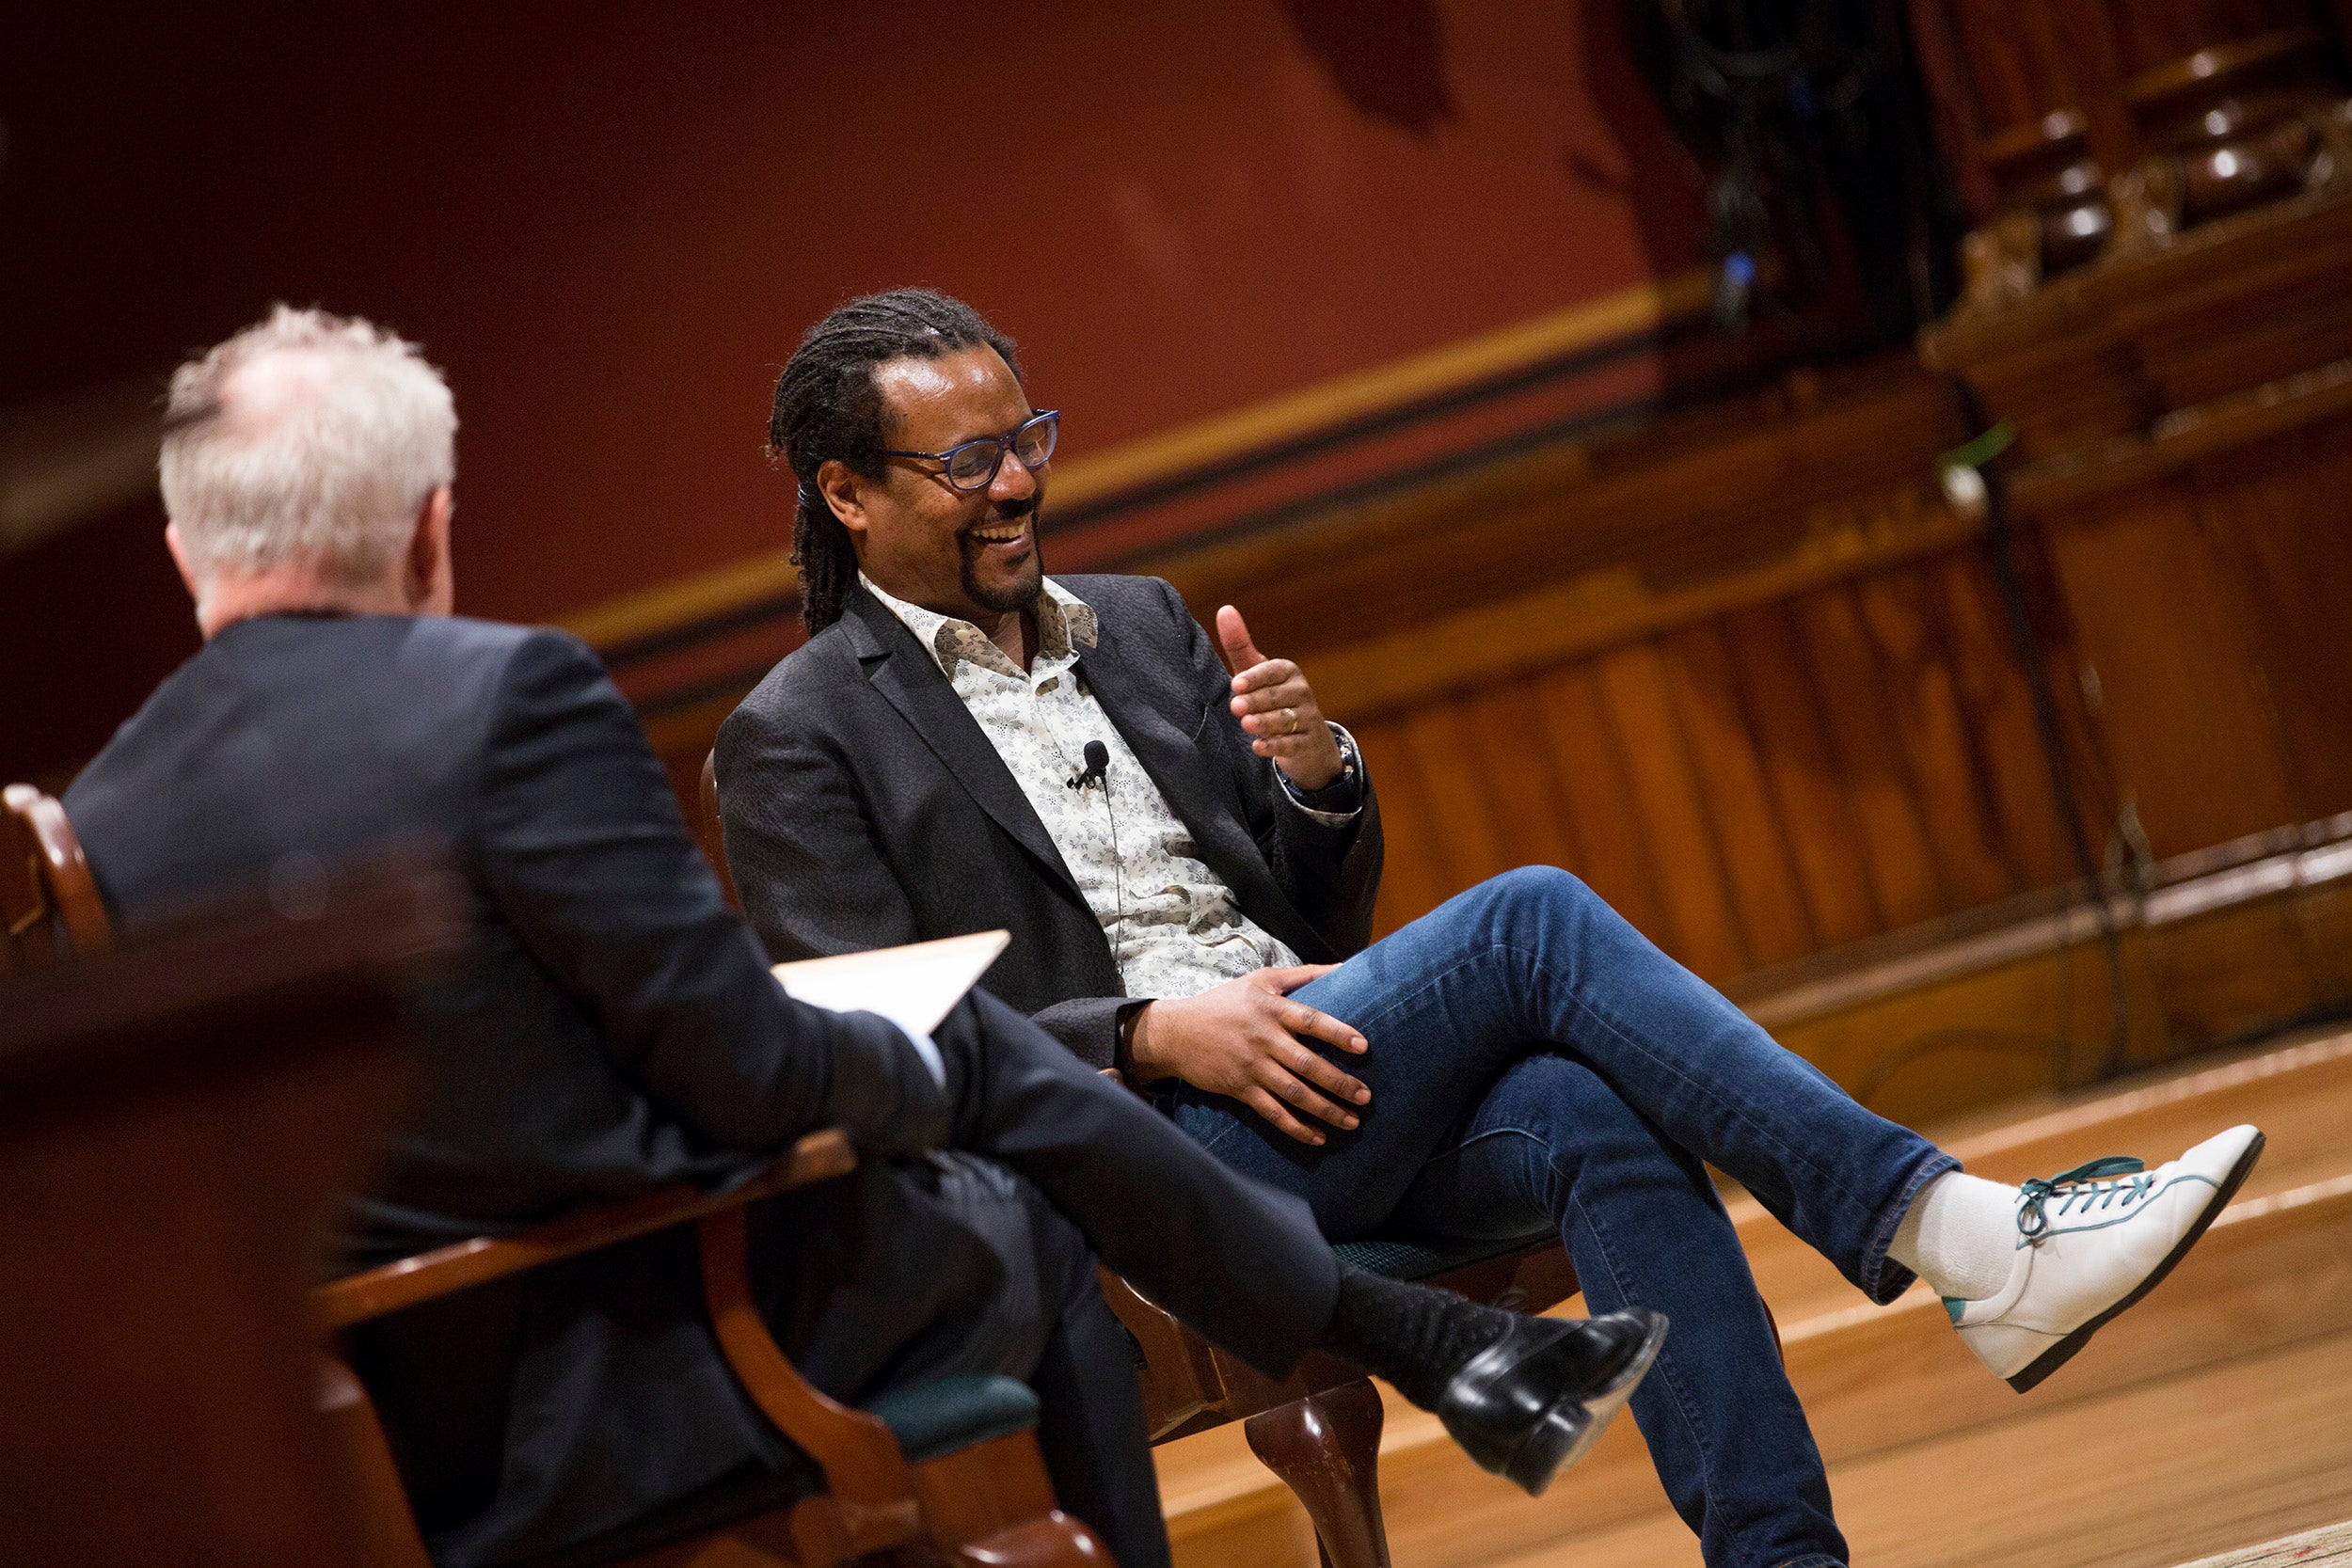 Colson Whitehead laughs with John Lithgow